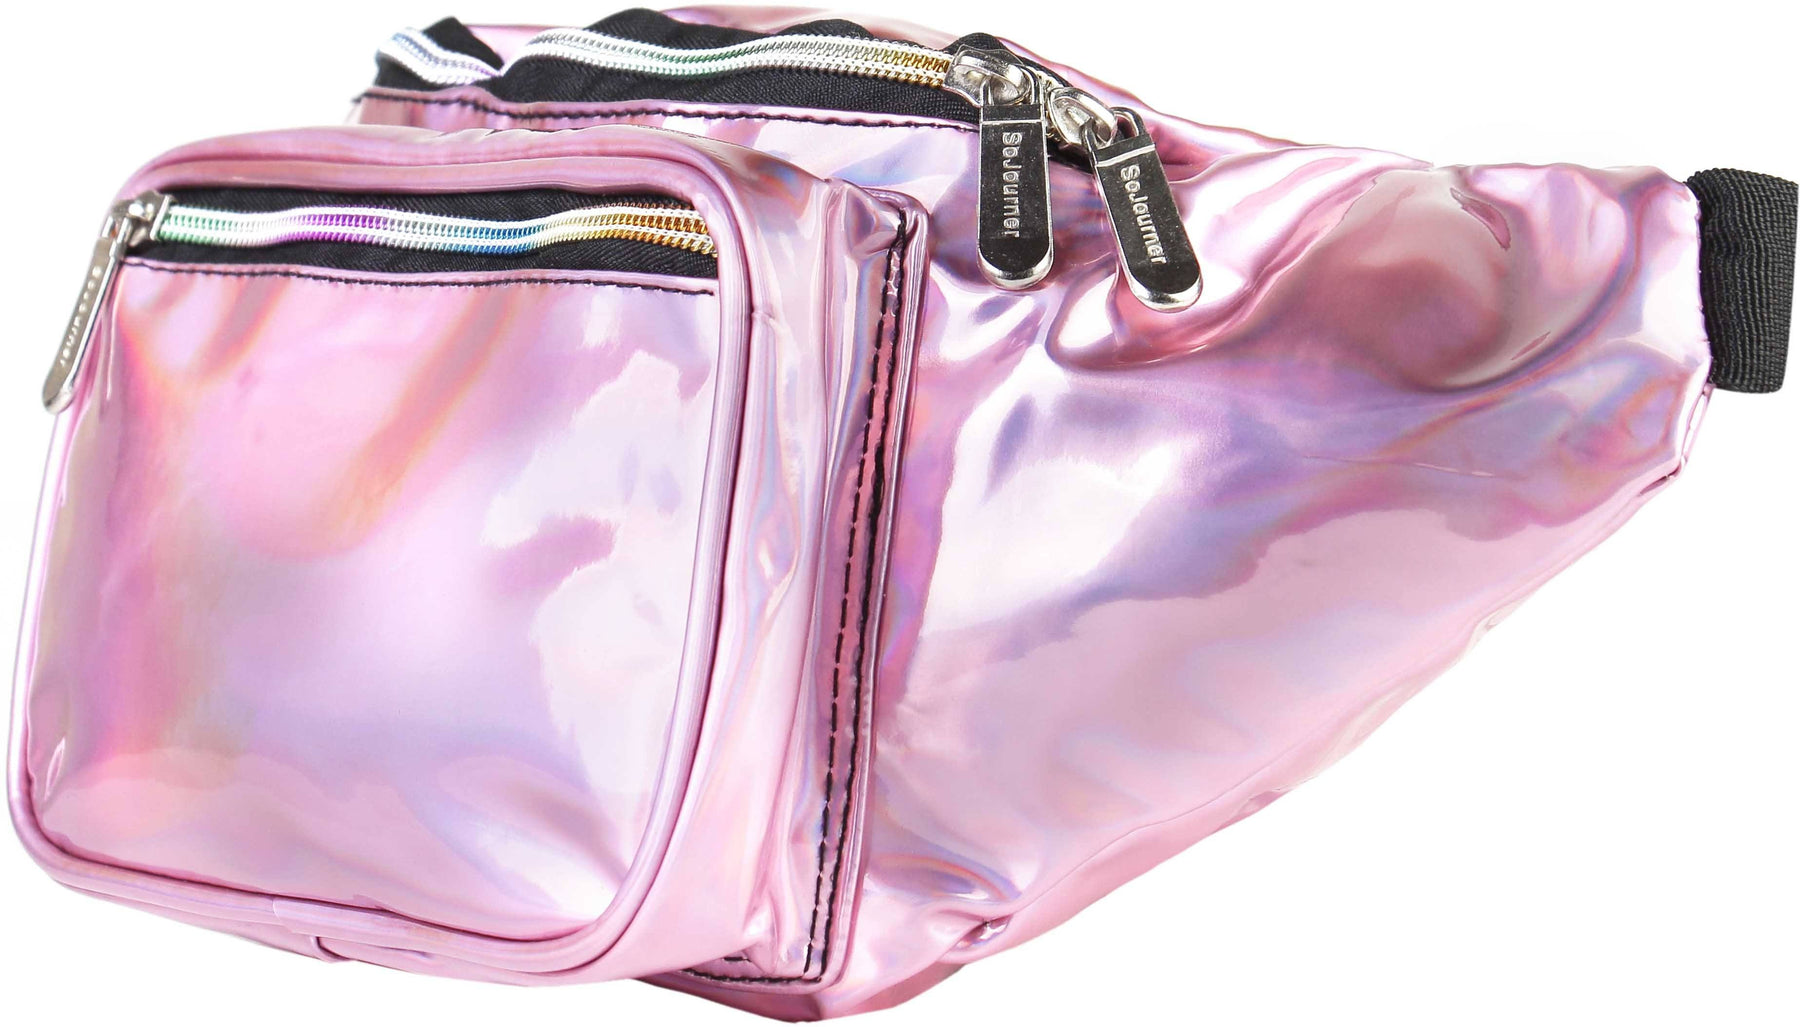 Fanny Pack Holographic Pink Fanny Pack - SoJourner Bags